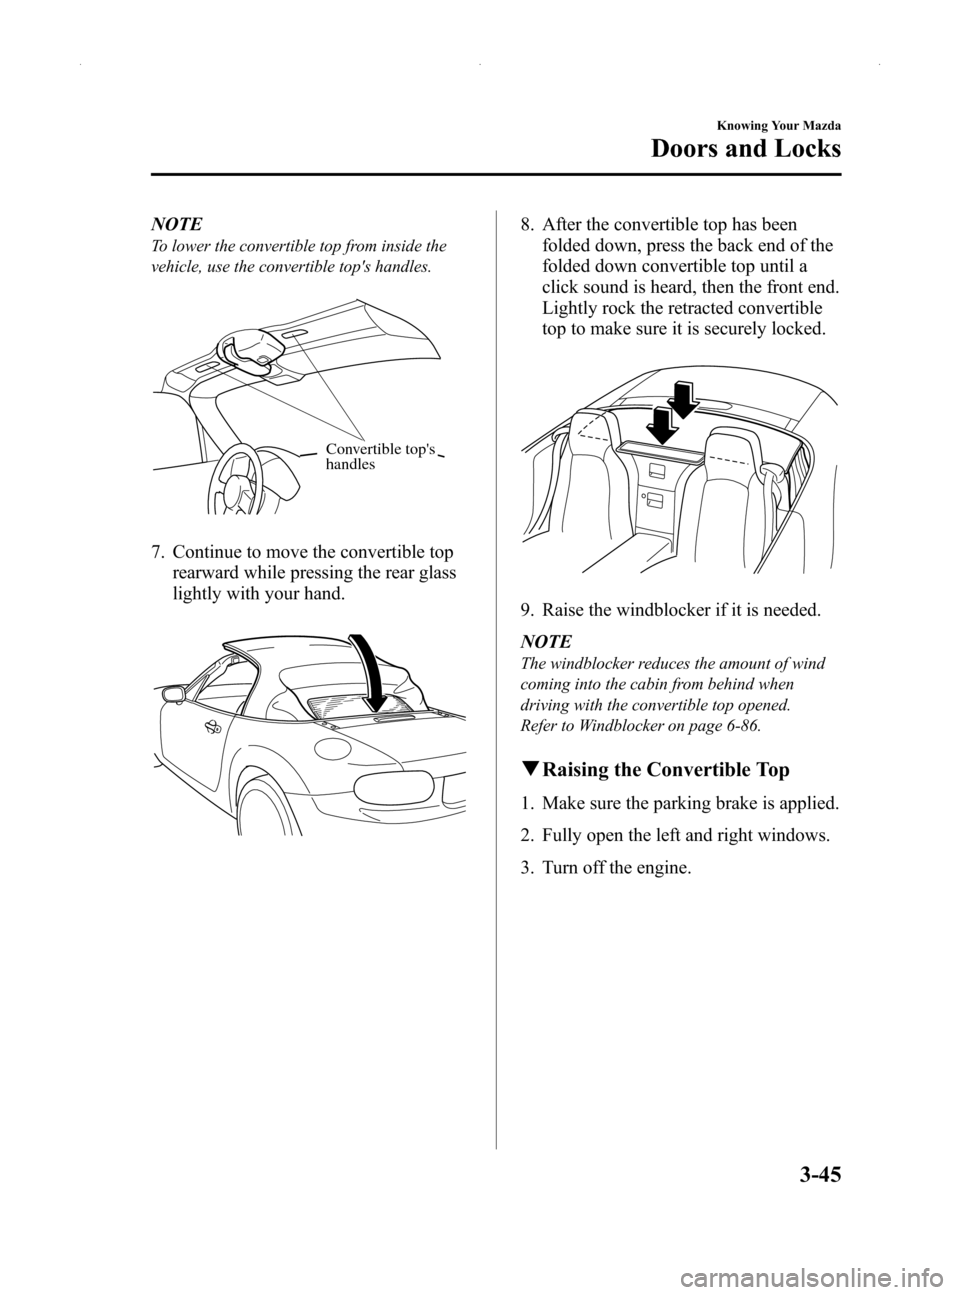 MAZDA MODEL MX-5 2014  Owners Manual (in English) Black plate (99,1)
NOTE
To lower the convertible top from inside the
vehicle, use the convertible tops handles.
Convertible tops 
handles
7. Continue to move the convertible top
rearward while press